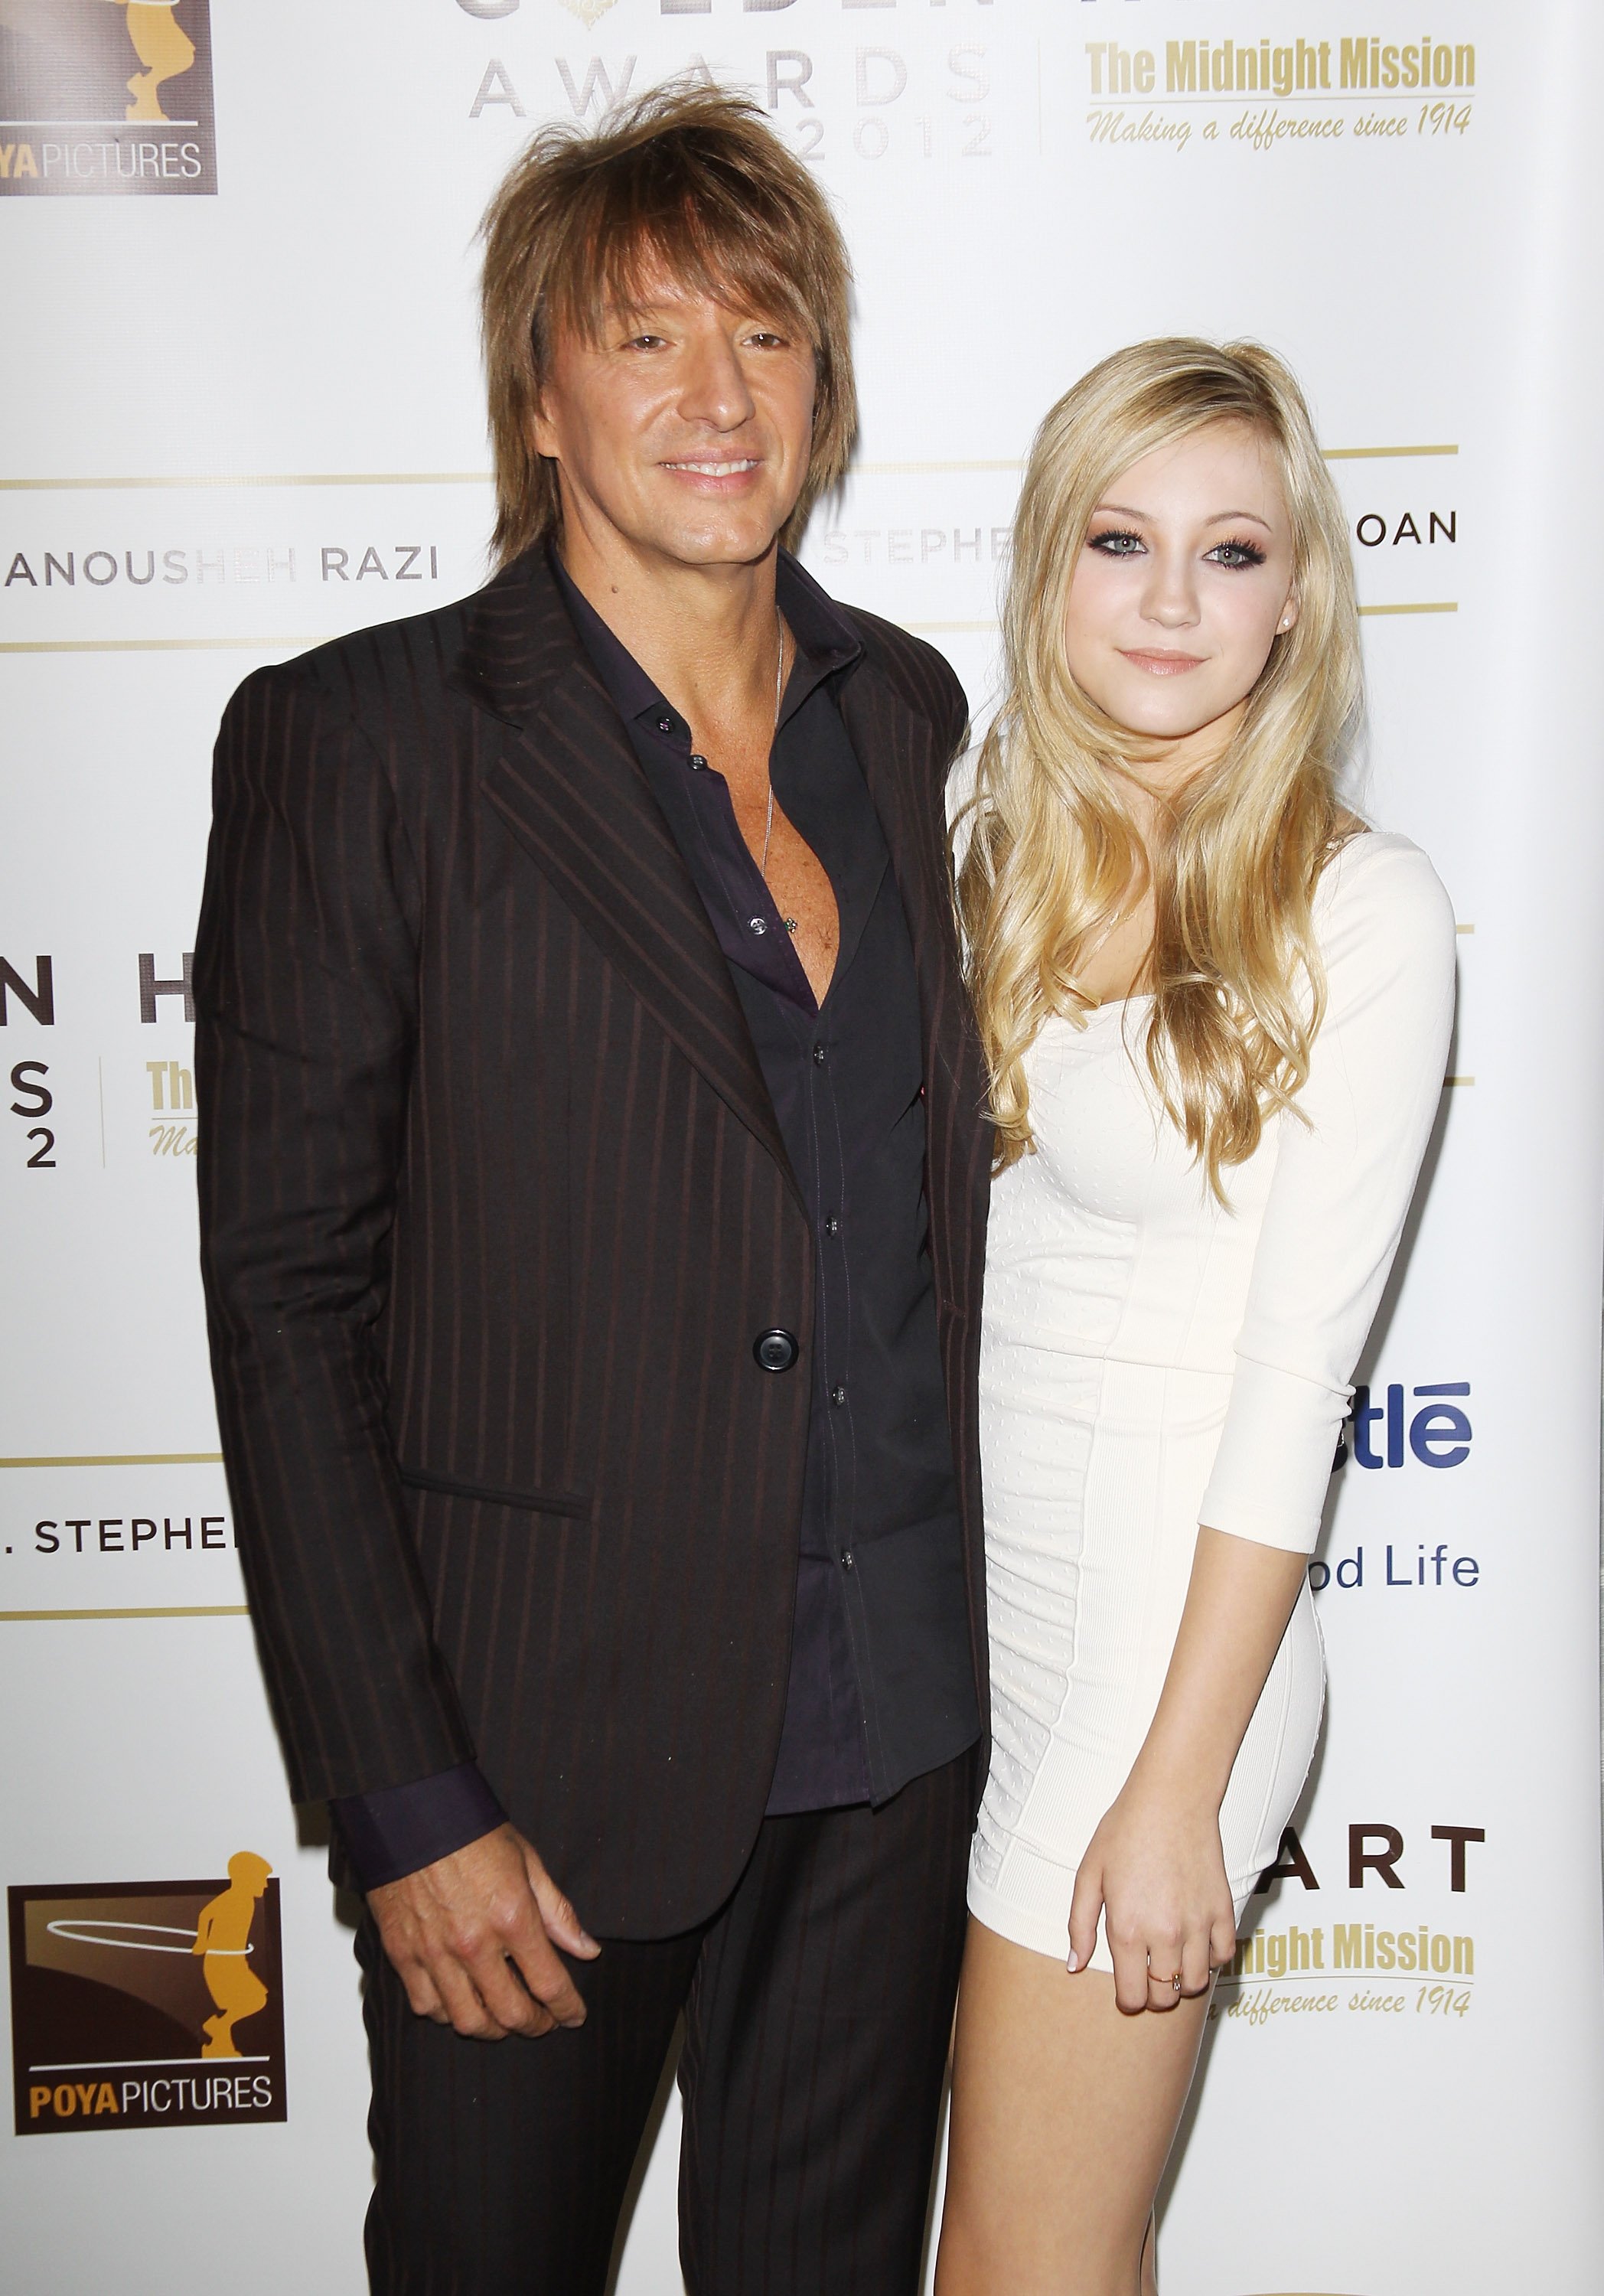  Richie Sambora and Ava Sambora arrive at the 12th Annual Golden Heart Awards Gala held at the Beverly Wilshire Four Seasons Hotel in Beverly Hills, California on May 7, 2012 | Source: Getty Images